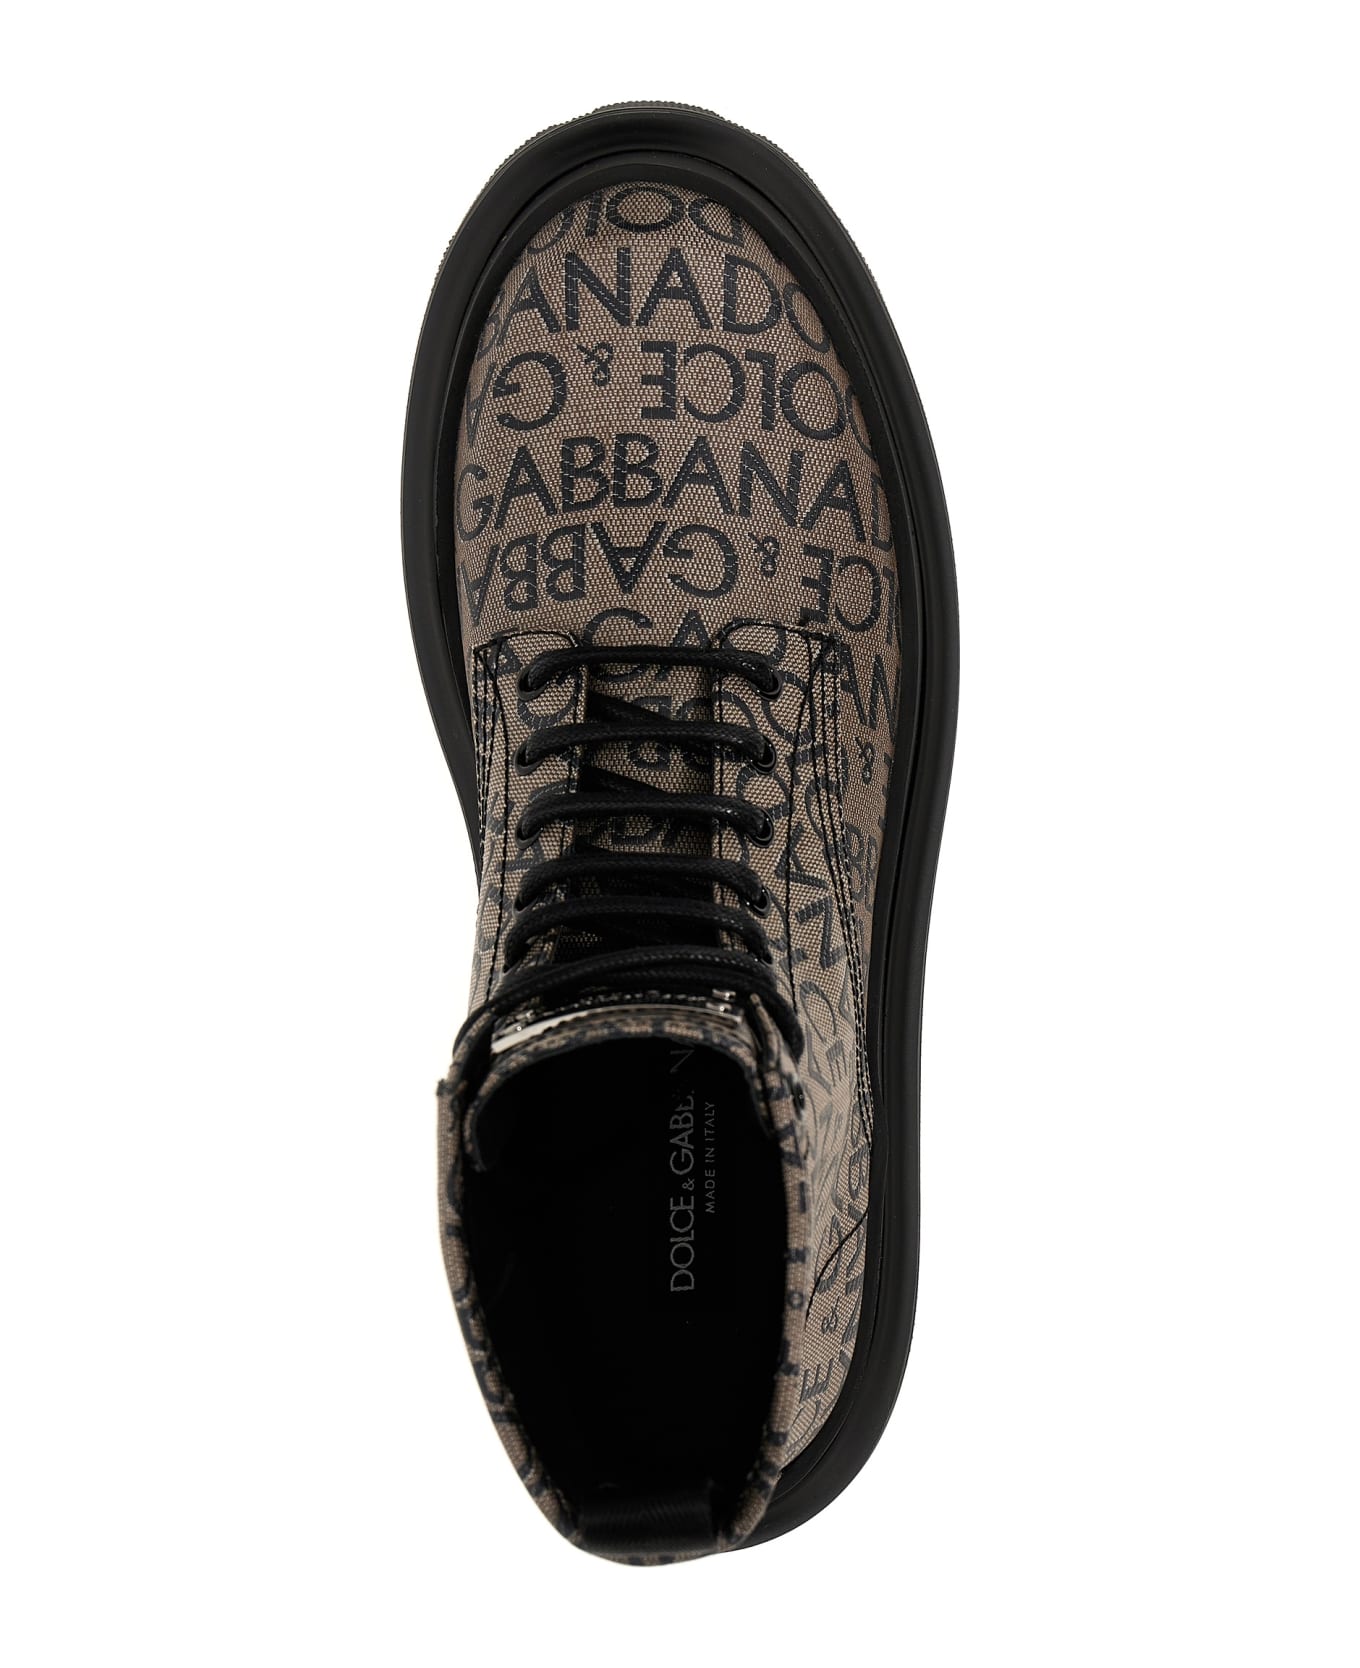 Dolce & Gabbana Jacquard Logo Combat Boots - Rounded-toe sneaker constructed with protective toe-cap